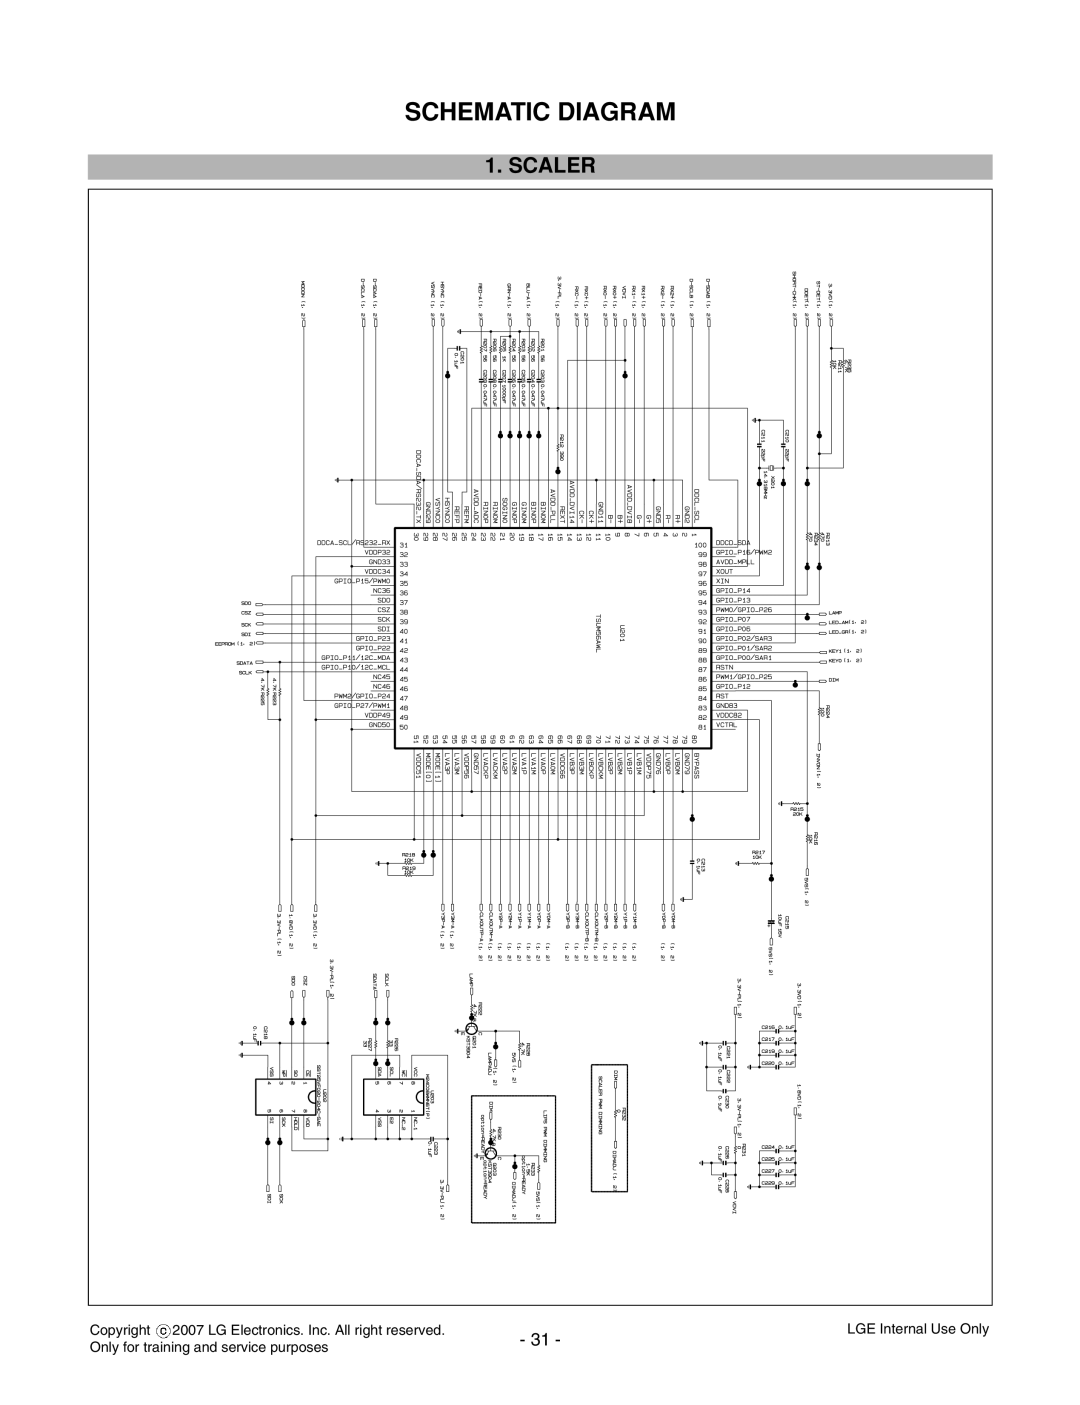 LG Electronics L1733TR, L1933TR Schematic Diagram, Scaler, LGE Internal Use Only, Only for training and service purposes 